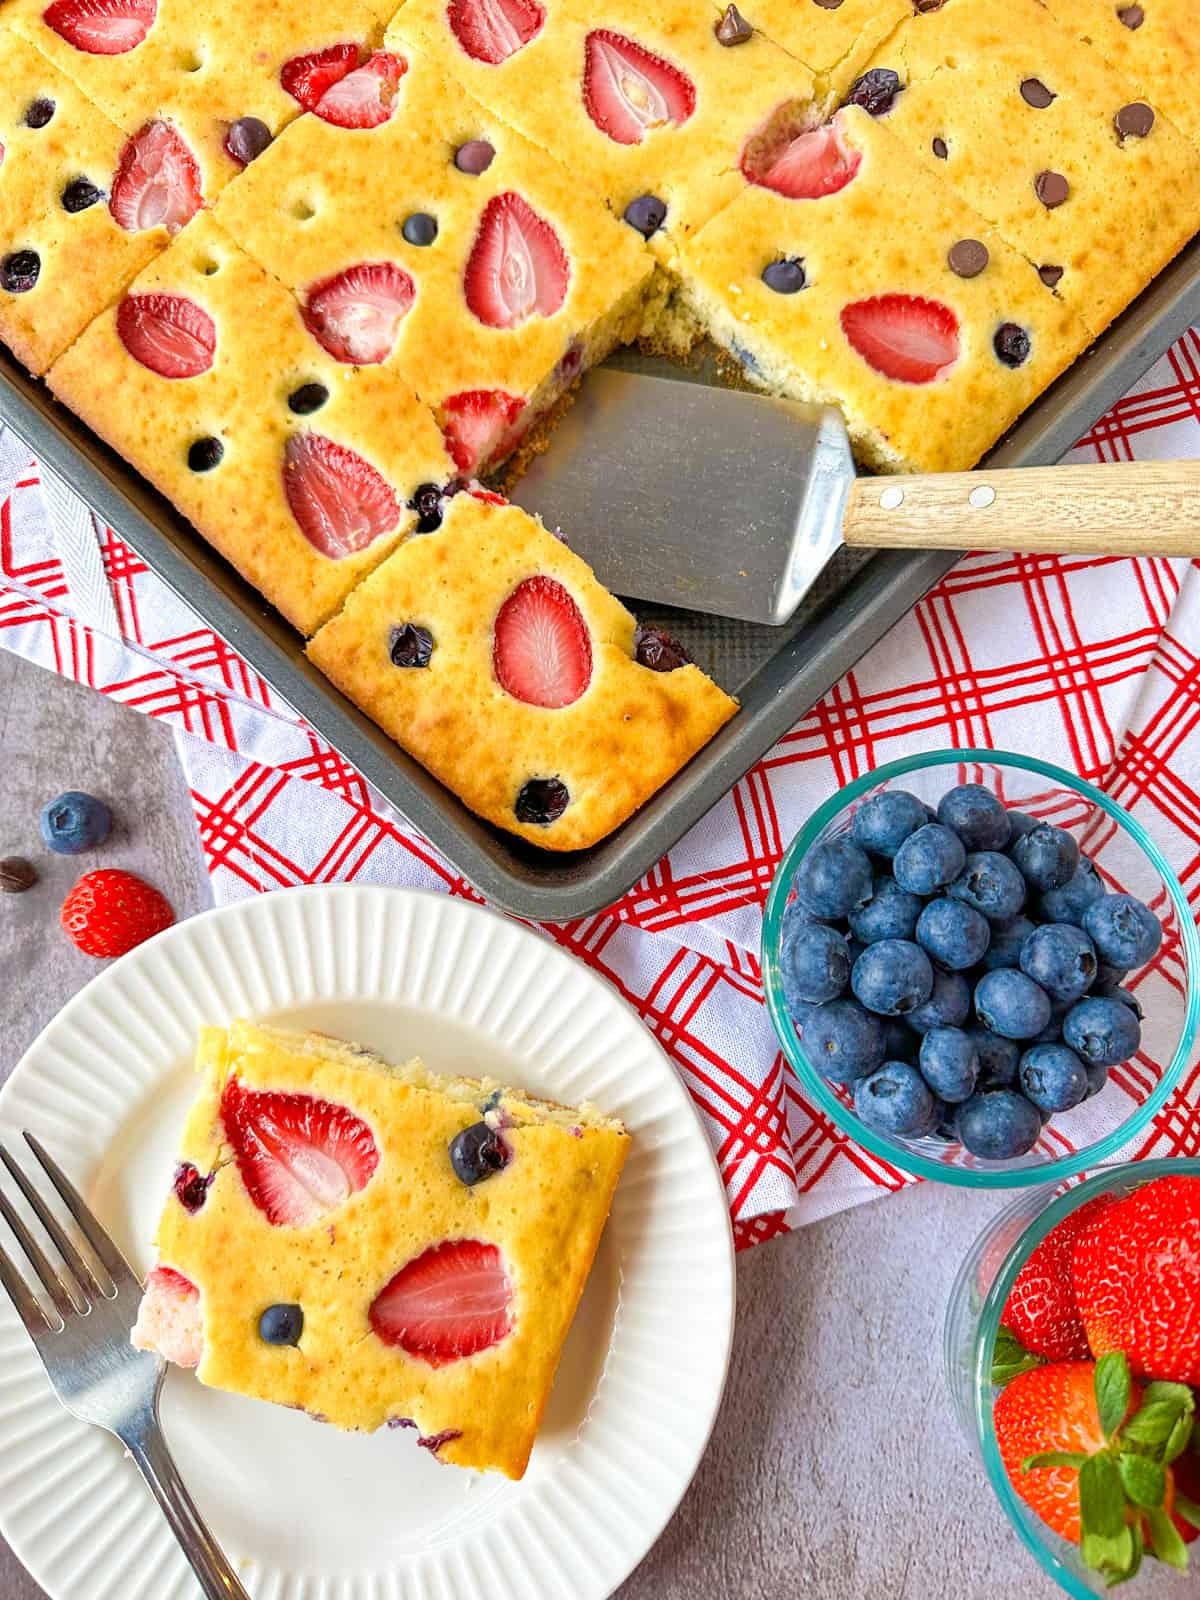 Sheet Pan Pancakes with one scooped on a plate with a bowl of strawberries and blueberries on the side.